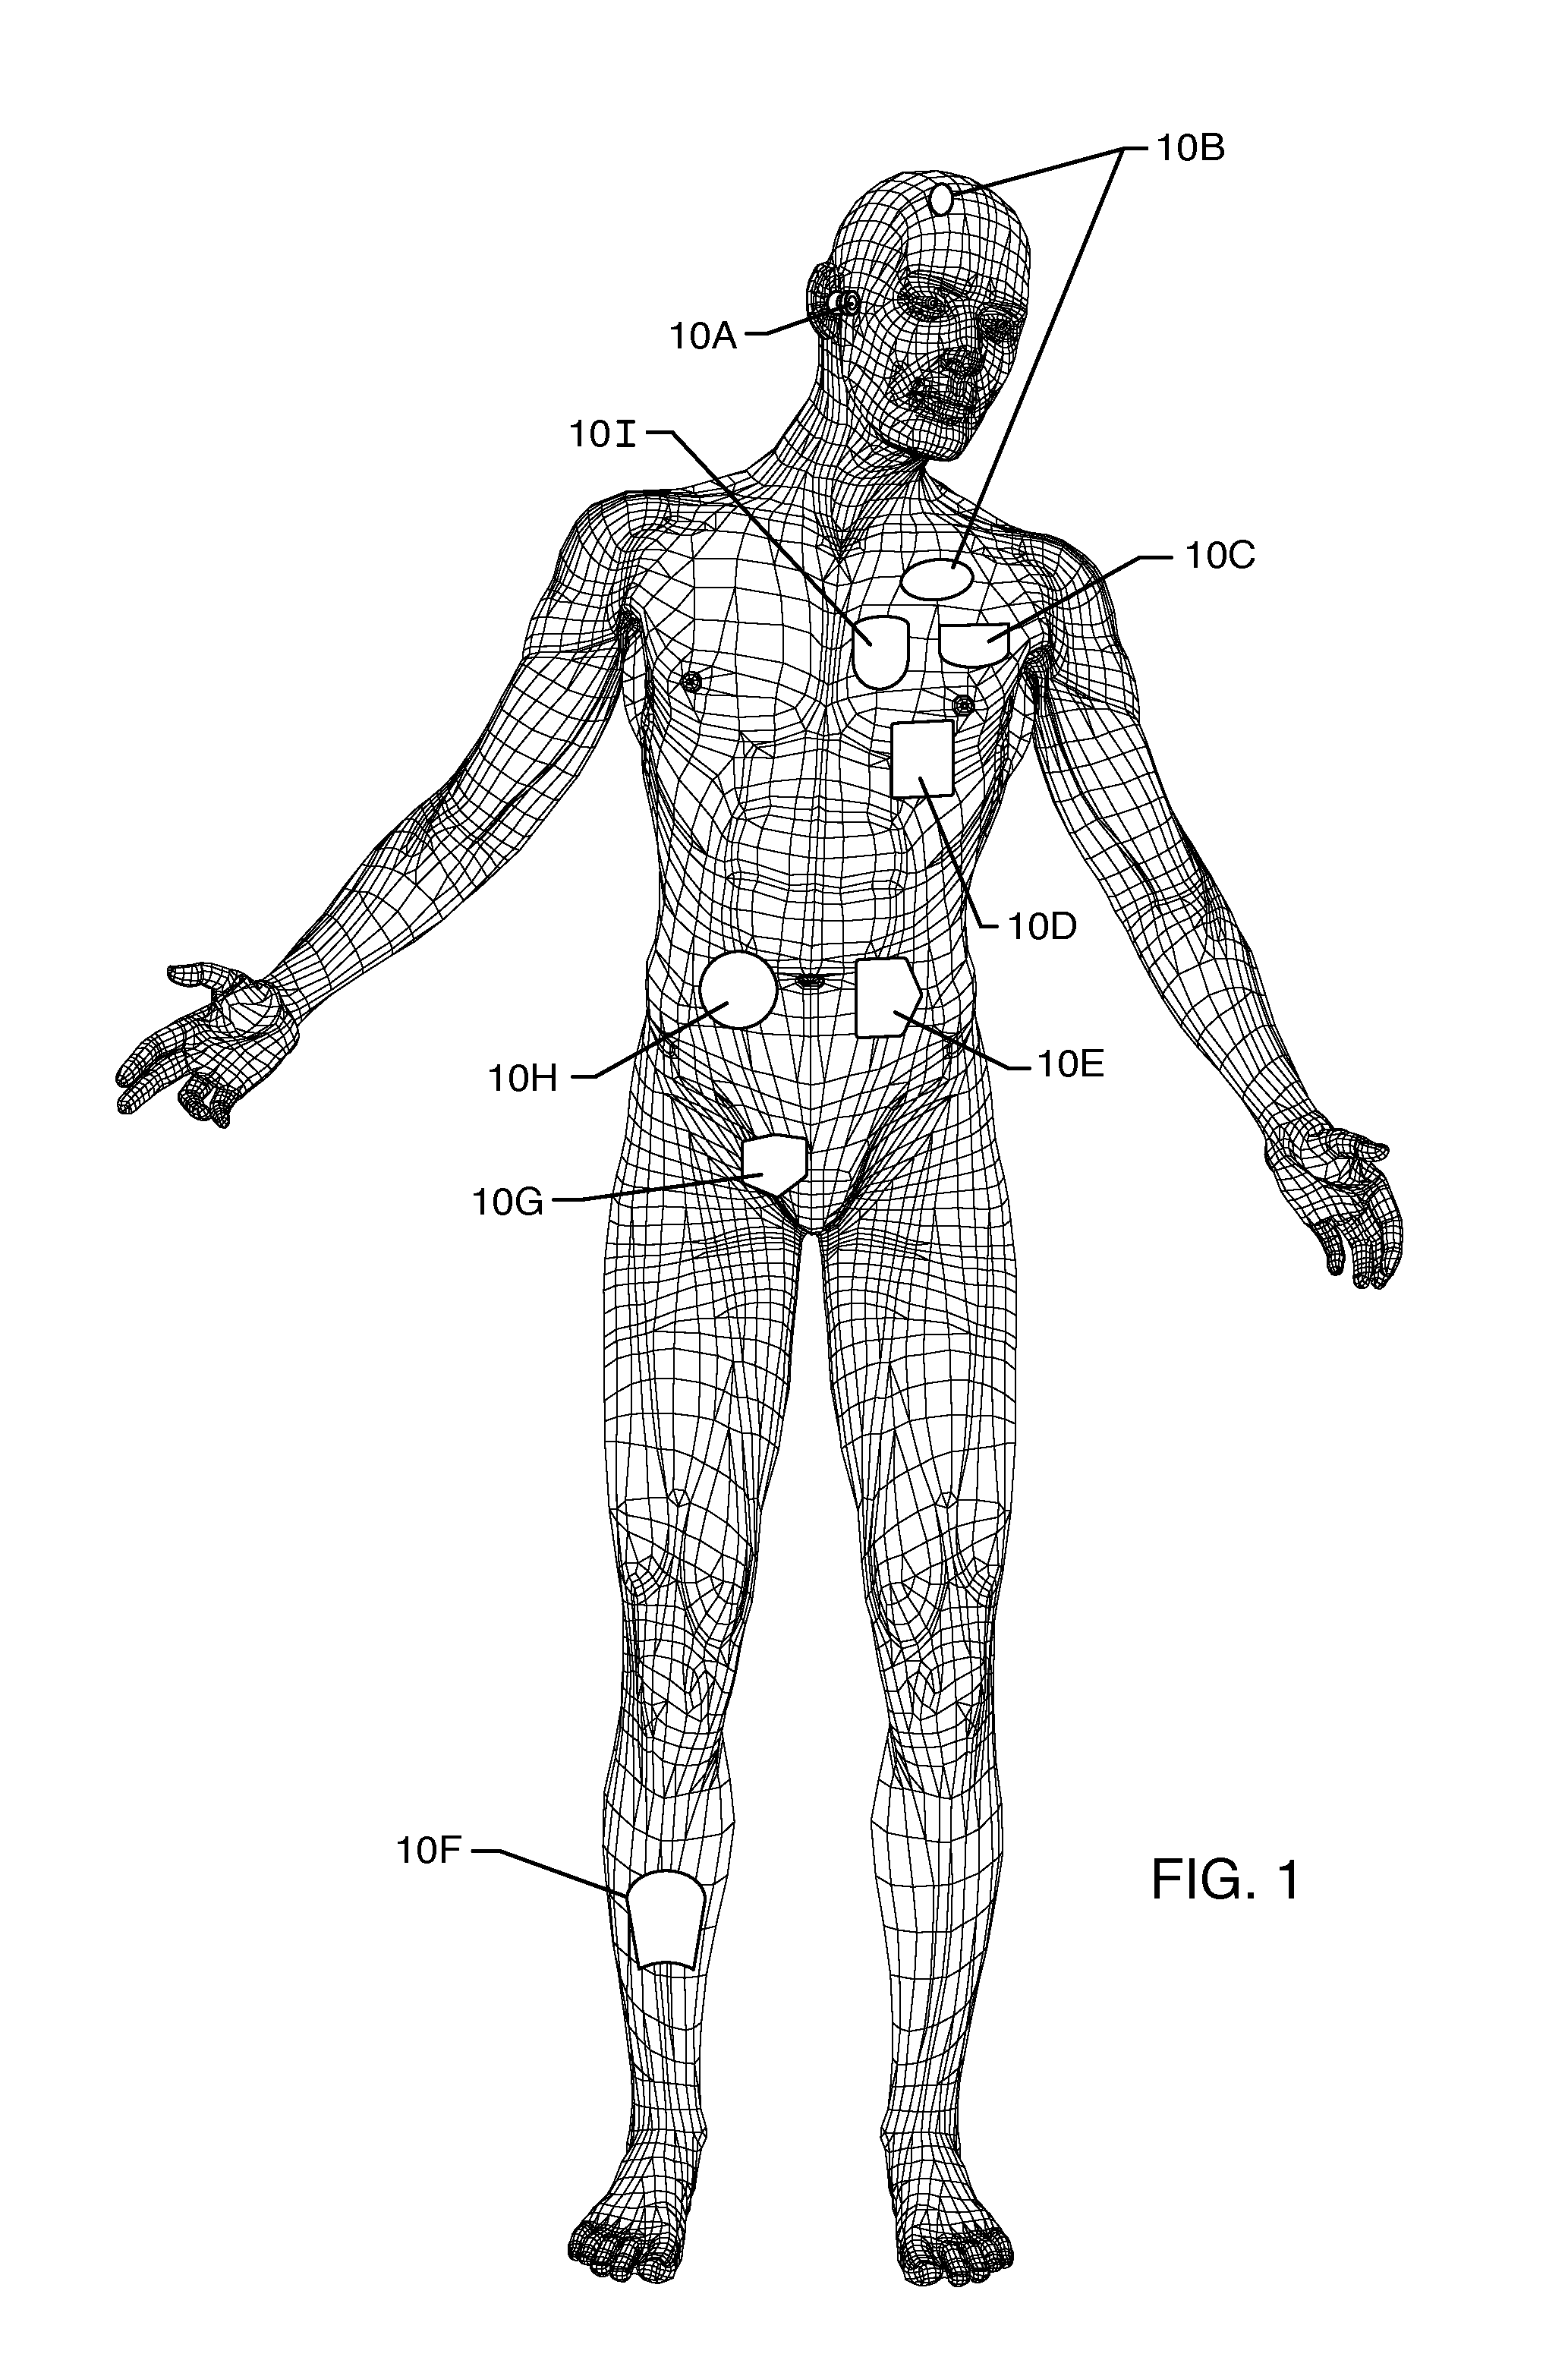 Electrically isolating electrical components in a medical electrical lead with an active fixation electrode